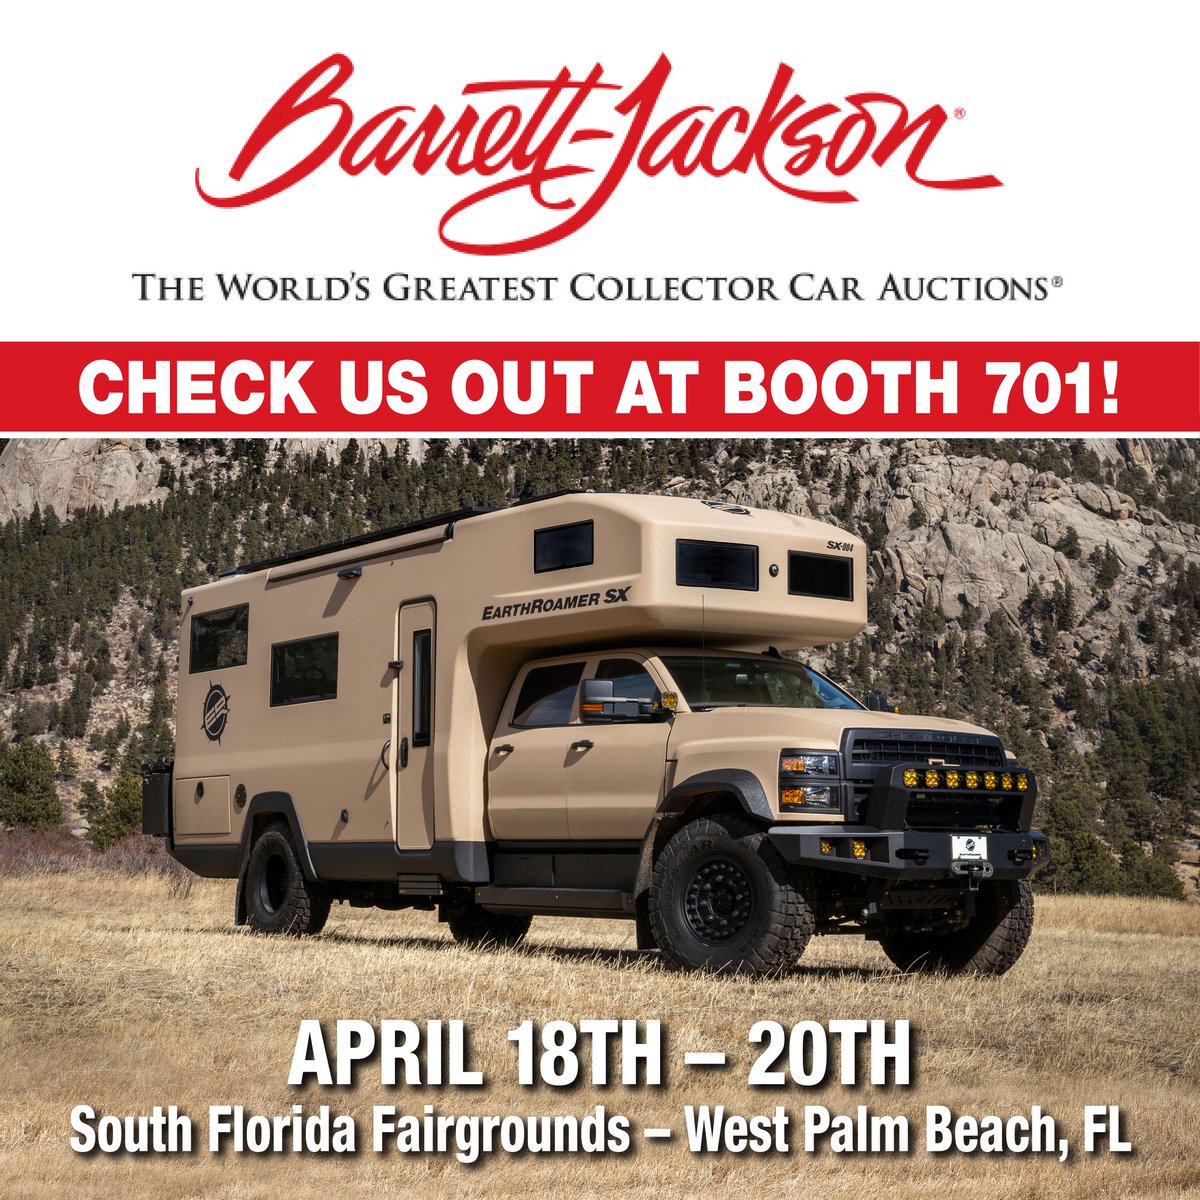 We are very excited to be at Barrett Jackson Palm Beach this weekend! We can be found in booth 701. We hope to see everyone there!